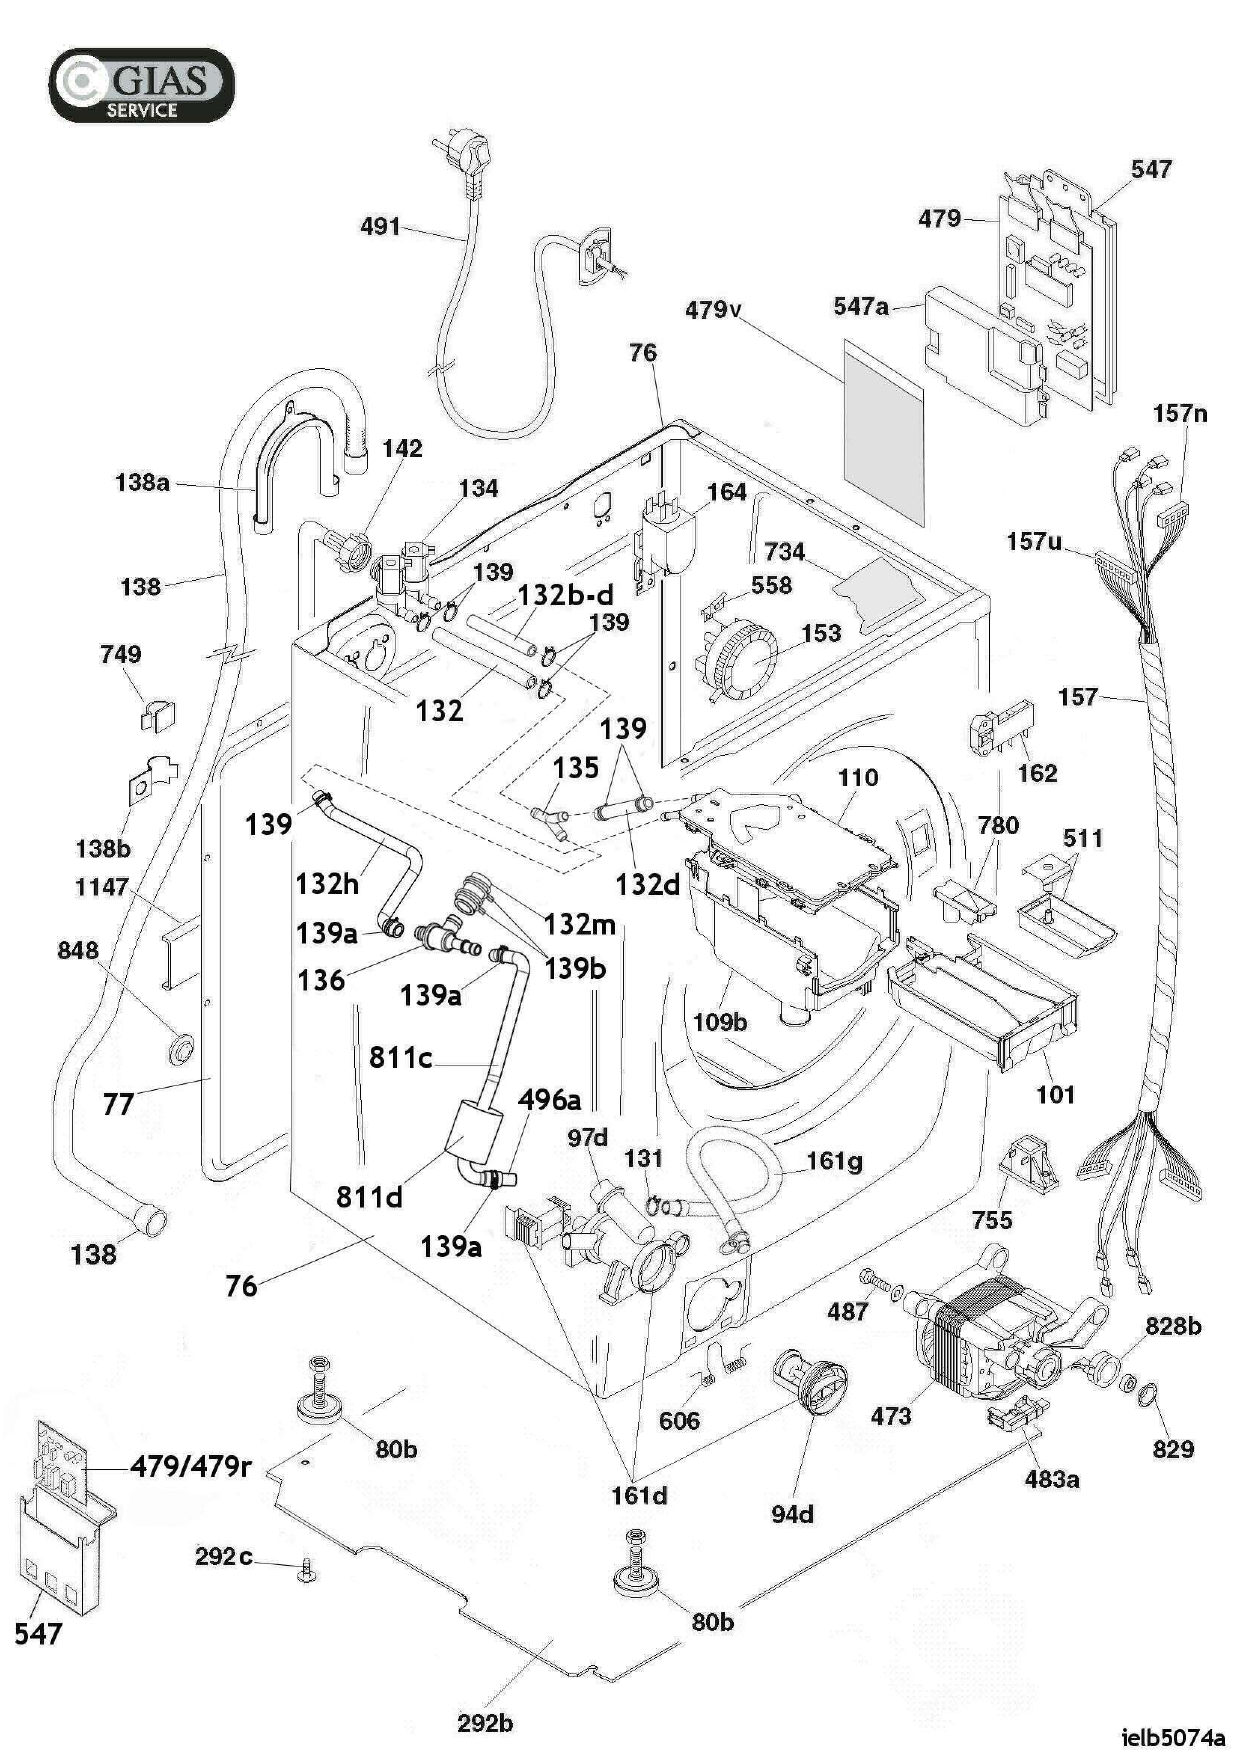 How to Repair Hoover Washing Machine DXA49W3.180 exploded diagram